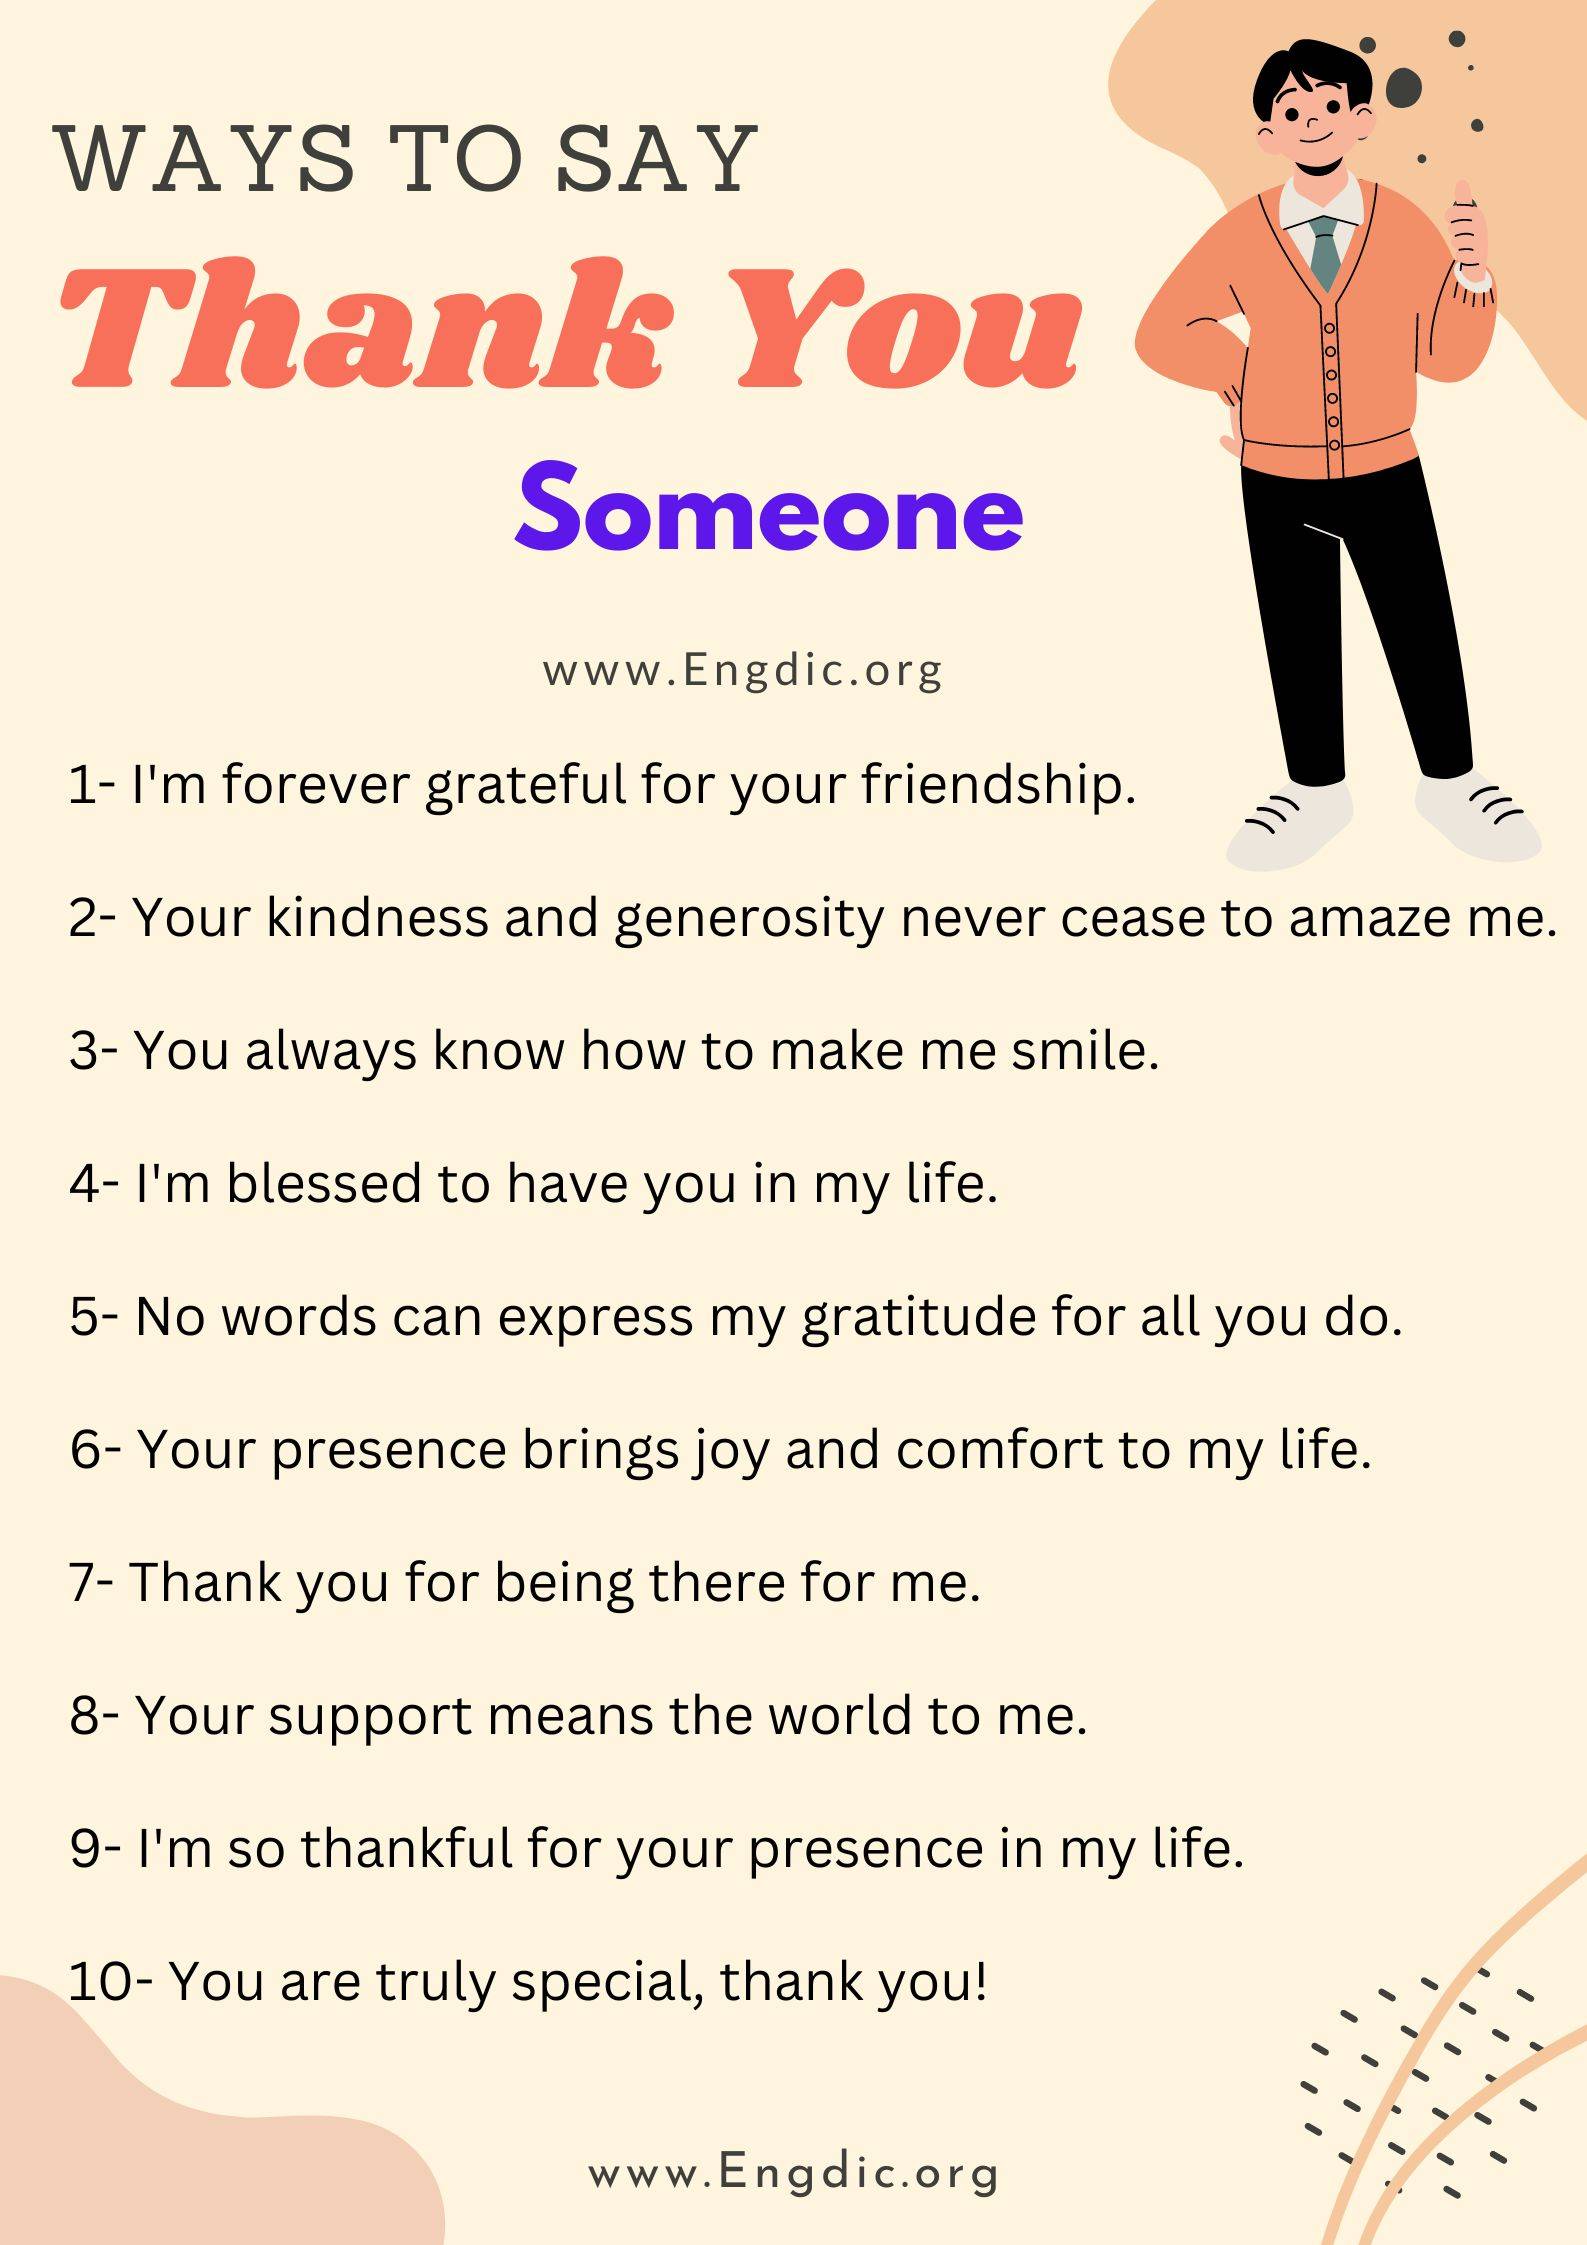 Ways to say thank you Someone